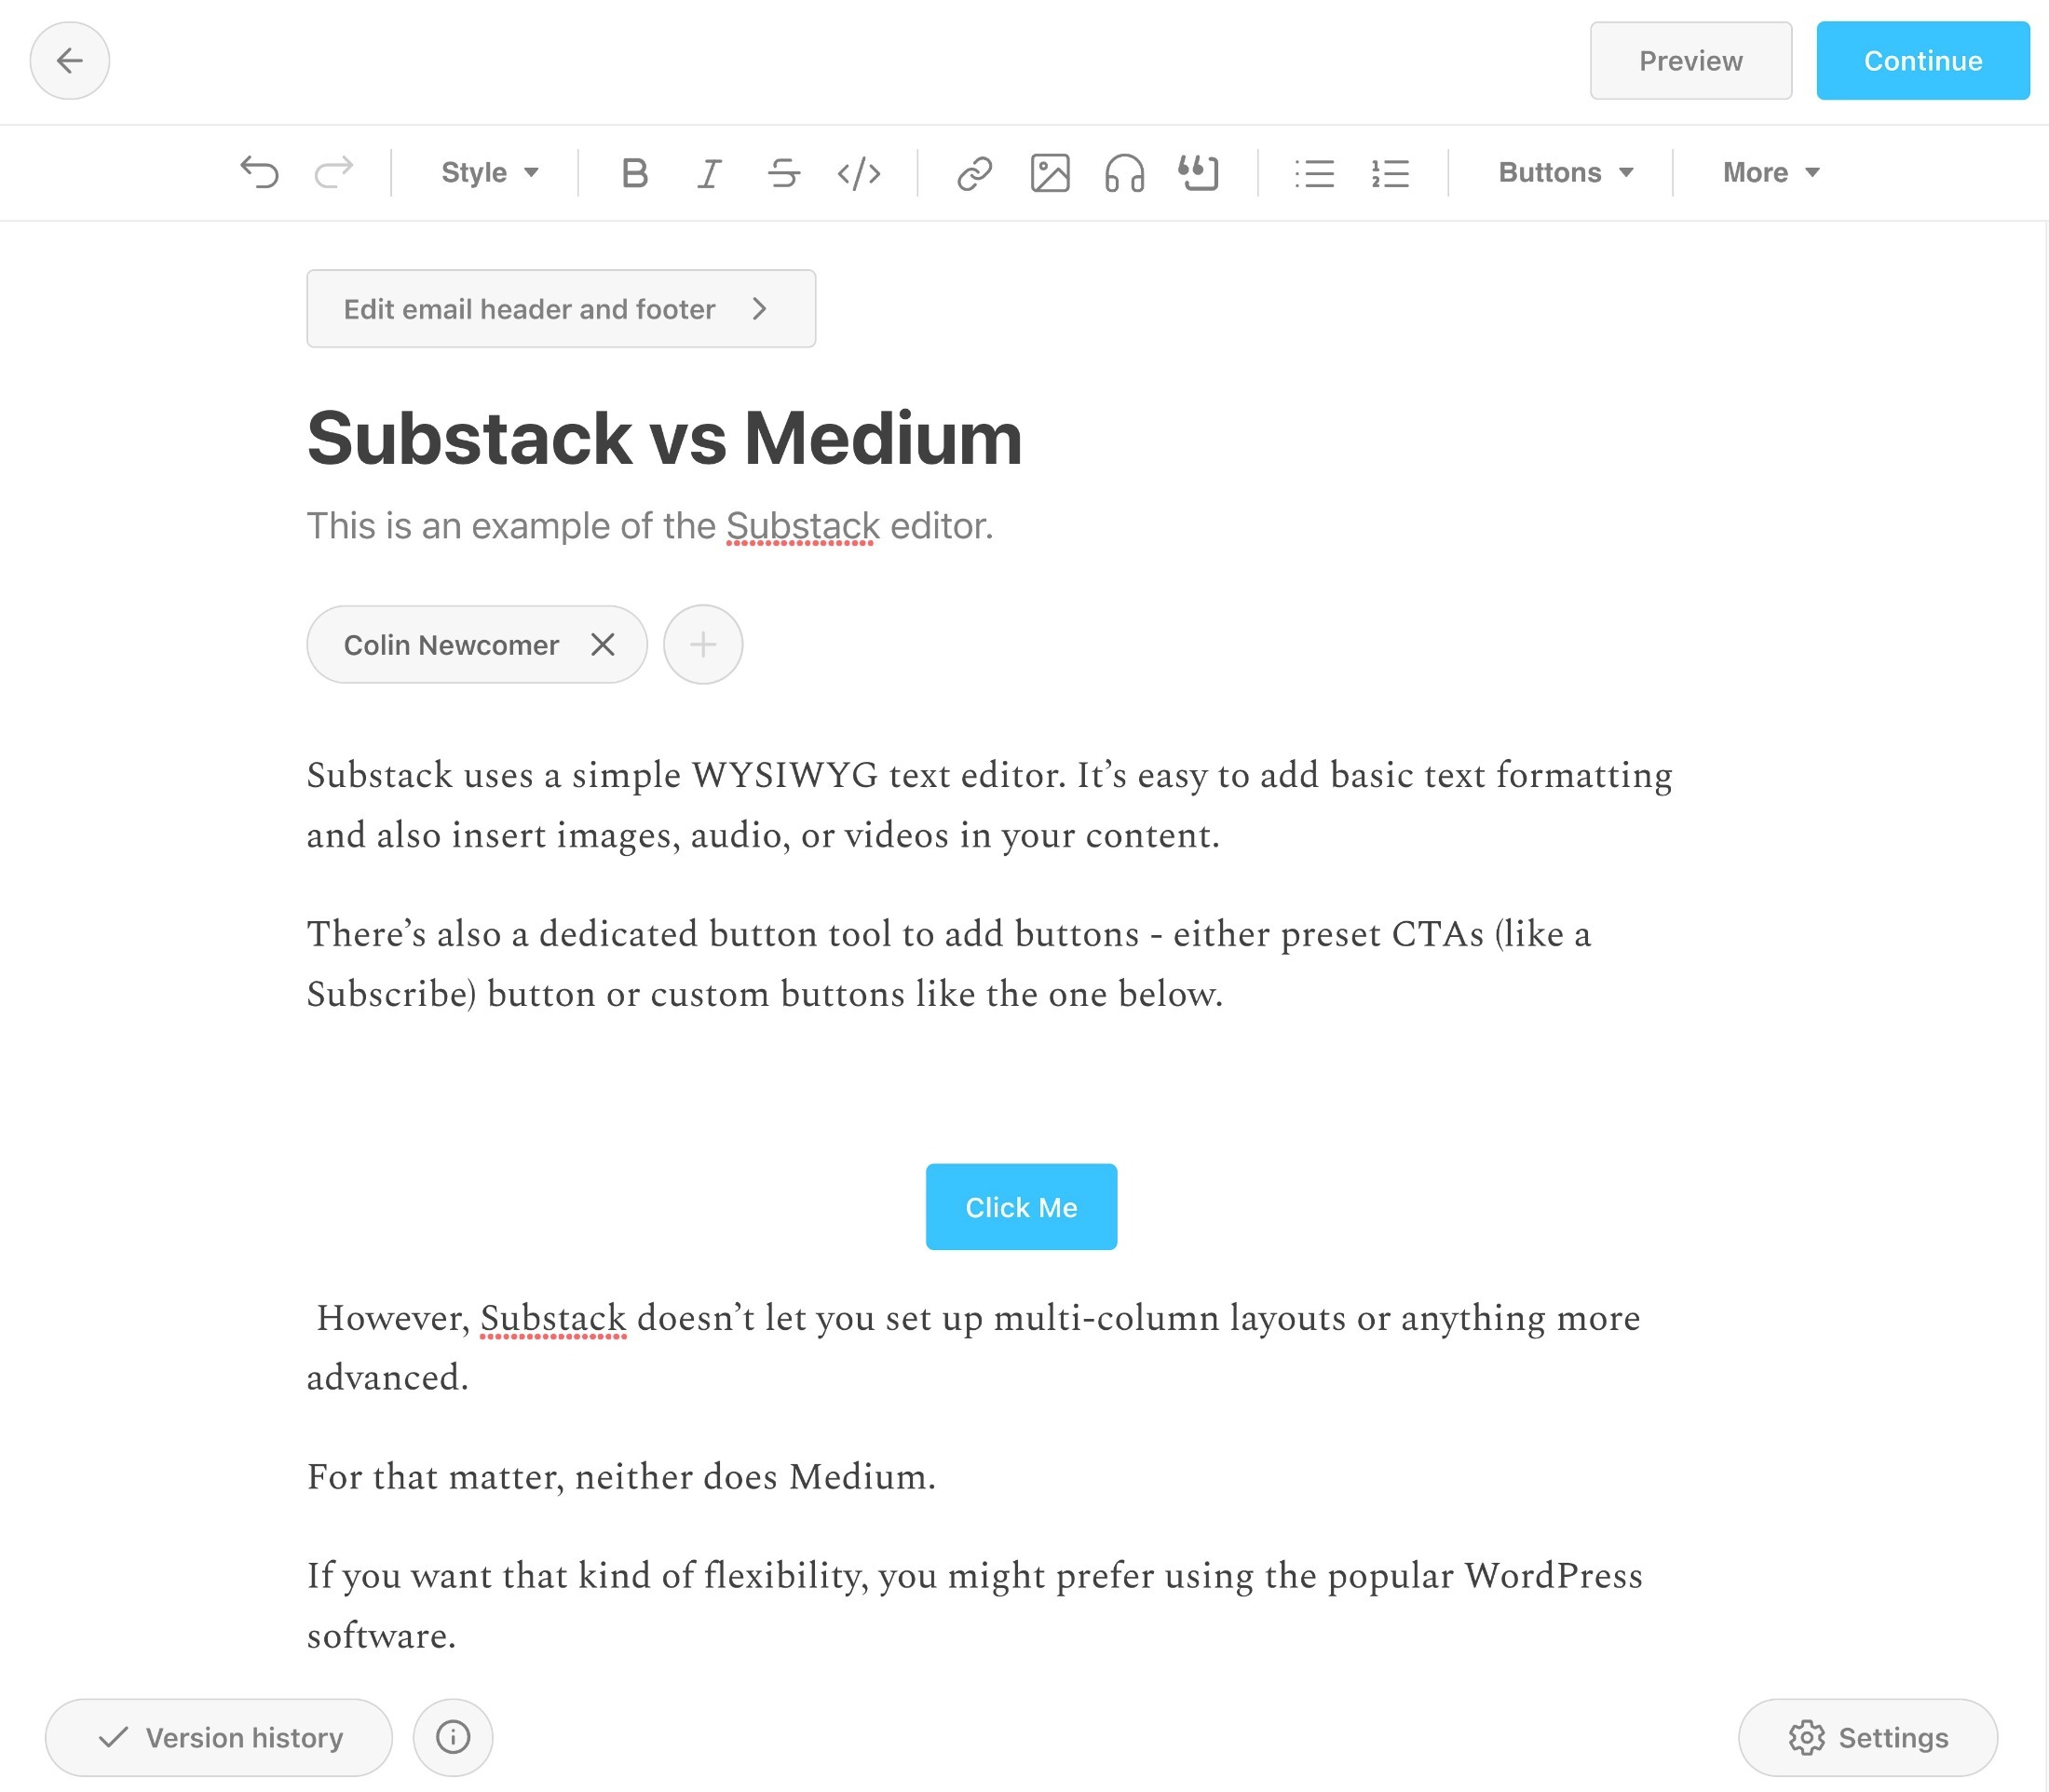 Substack content editor